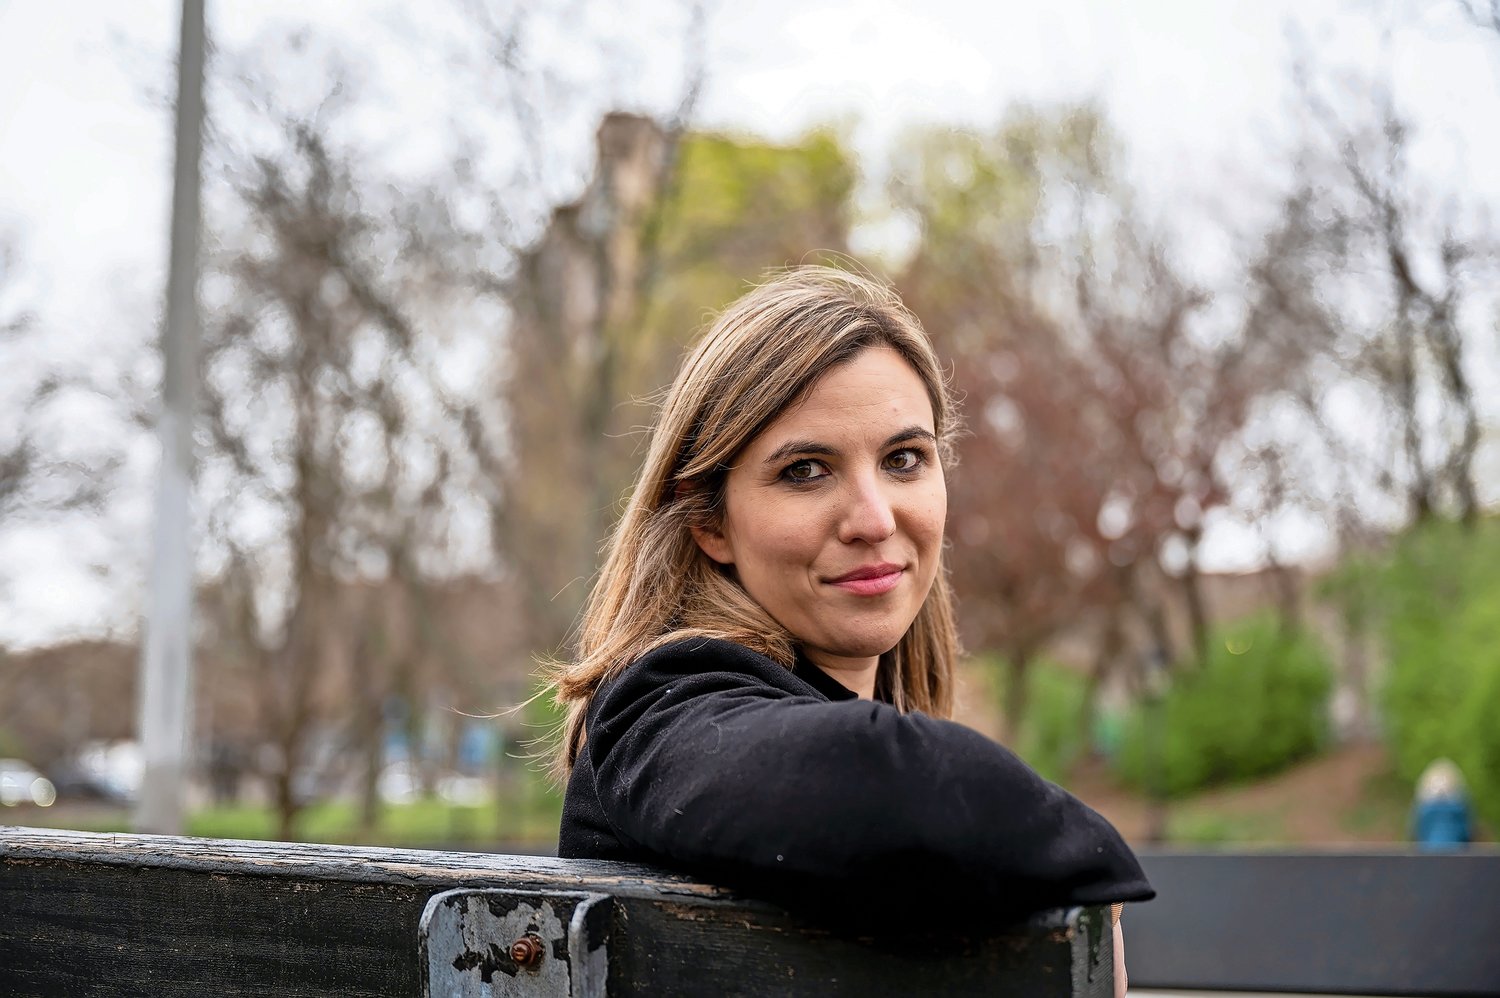 Morgan Evers, who was elected a state committee members, shown in Seton Park on April 18, 2022.